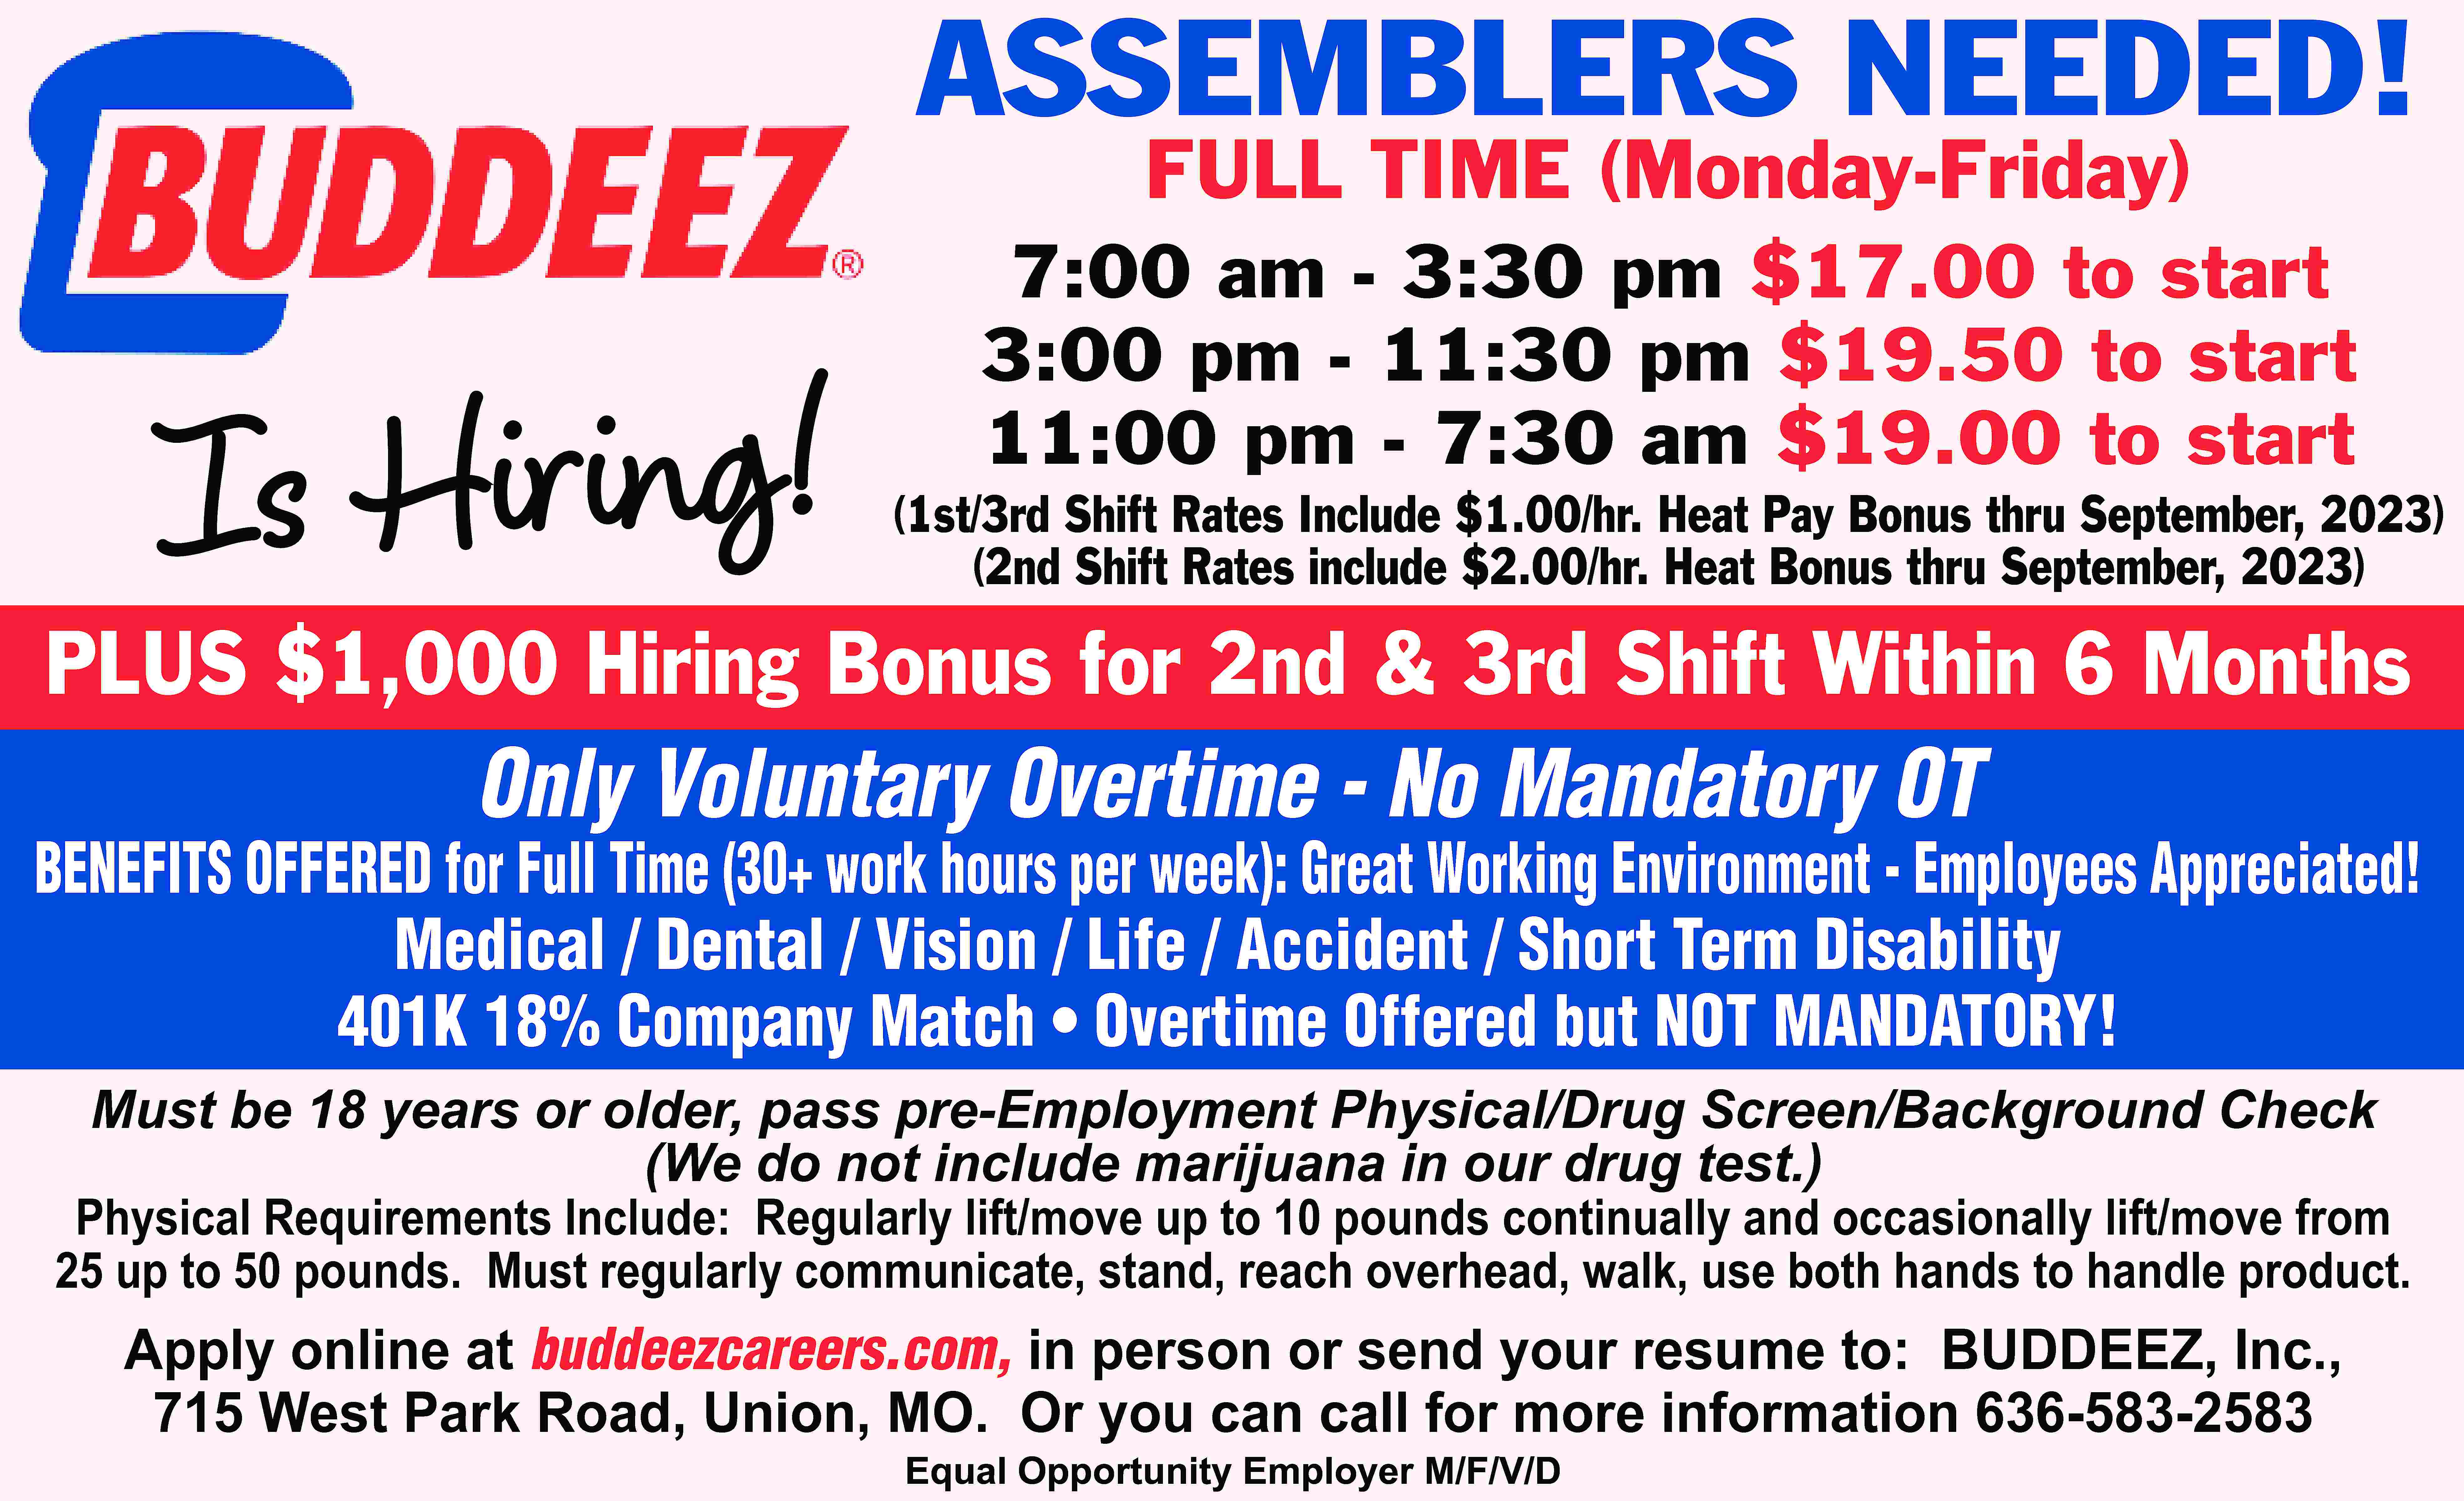 ASSEMBLERS NEEDED! FULL TIME (Monday-Friday)  ASSEMBLERS NEEDED! FULL TIME (Monday-Friday) Is Hiring! 7:00 am - 3:30 pm $17.00 to start 3:00 pm - 11:30 pm $19.50 to start 11:00 pm - 7:30 am $19.00 to start (1st/3rd Shift Rates Include $1.00/hr. Heat Pay Bonus thru September, 2023) (2nd Shift Rates include $2.00/hr. Heat Bonus thru September, 2023) PLUS $1,000 Hiring Bonus for 2nd & 3rd Shift Within 6 Months Only Voluntary Overtime - No Mandatory OT BENEFITS OFFERED for Full Time (30+ work hours per week): Great Working Environment - Employees Appreciated! Medical / Dental / Vision / Life / Accident / Short Term Disability 401K 18% Company Match • Overtime Offered but NOT MANDATORY! Must be 18 years or older, pass pre-Employment Physical/Drug Screen/Background Check (We do not include marijuana in our drug test.) Physical Requirements Include: Regularly lift/move up to 10 pounds continually and occasionally lift/move from 25 up to 50 pounds. Must regularly communicate, stand, reach overhead, walk, use both hands to handle product. Apply online at buddeezcareers.com, in person or send your resume to: BUDDEEZ, Inc., 715 West Park Road, Union, MO. Or you can call for more information 636-583-2583 Equal Opportunity Employer M/F/V/D